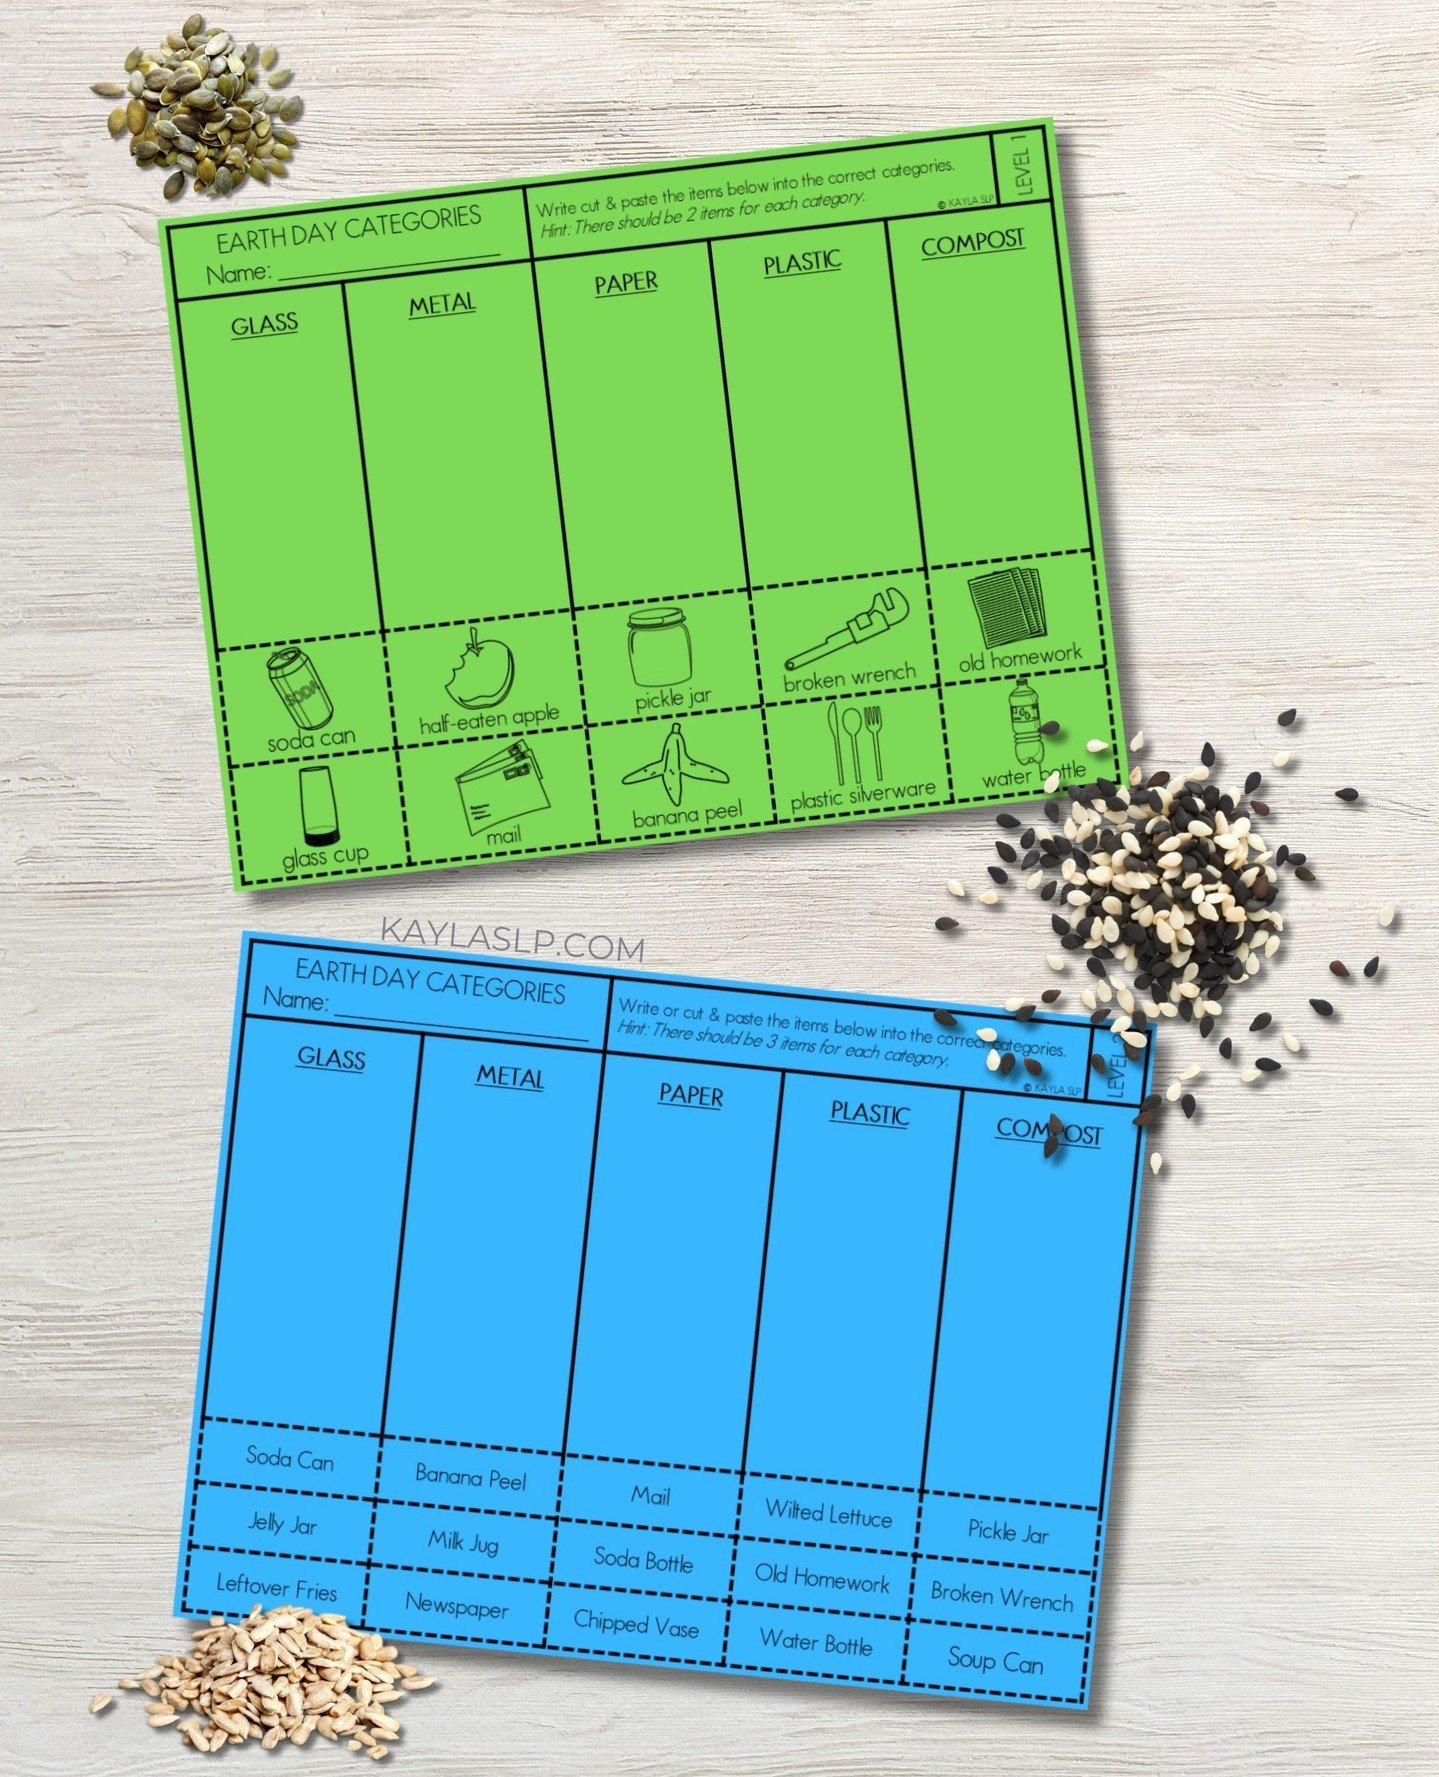 FREEBIE ALERT!⁠
⁠
Practice sorting into categories with these free worksheets!⁠
⁠
Included are 2 versions for differentiated instruction.⁠
♻️Sort using pictures OR⁠
♻️Sort using text only!⁠
⁠
Great to use for targeting sorting and categories with ele